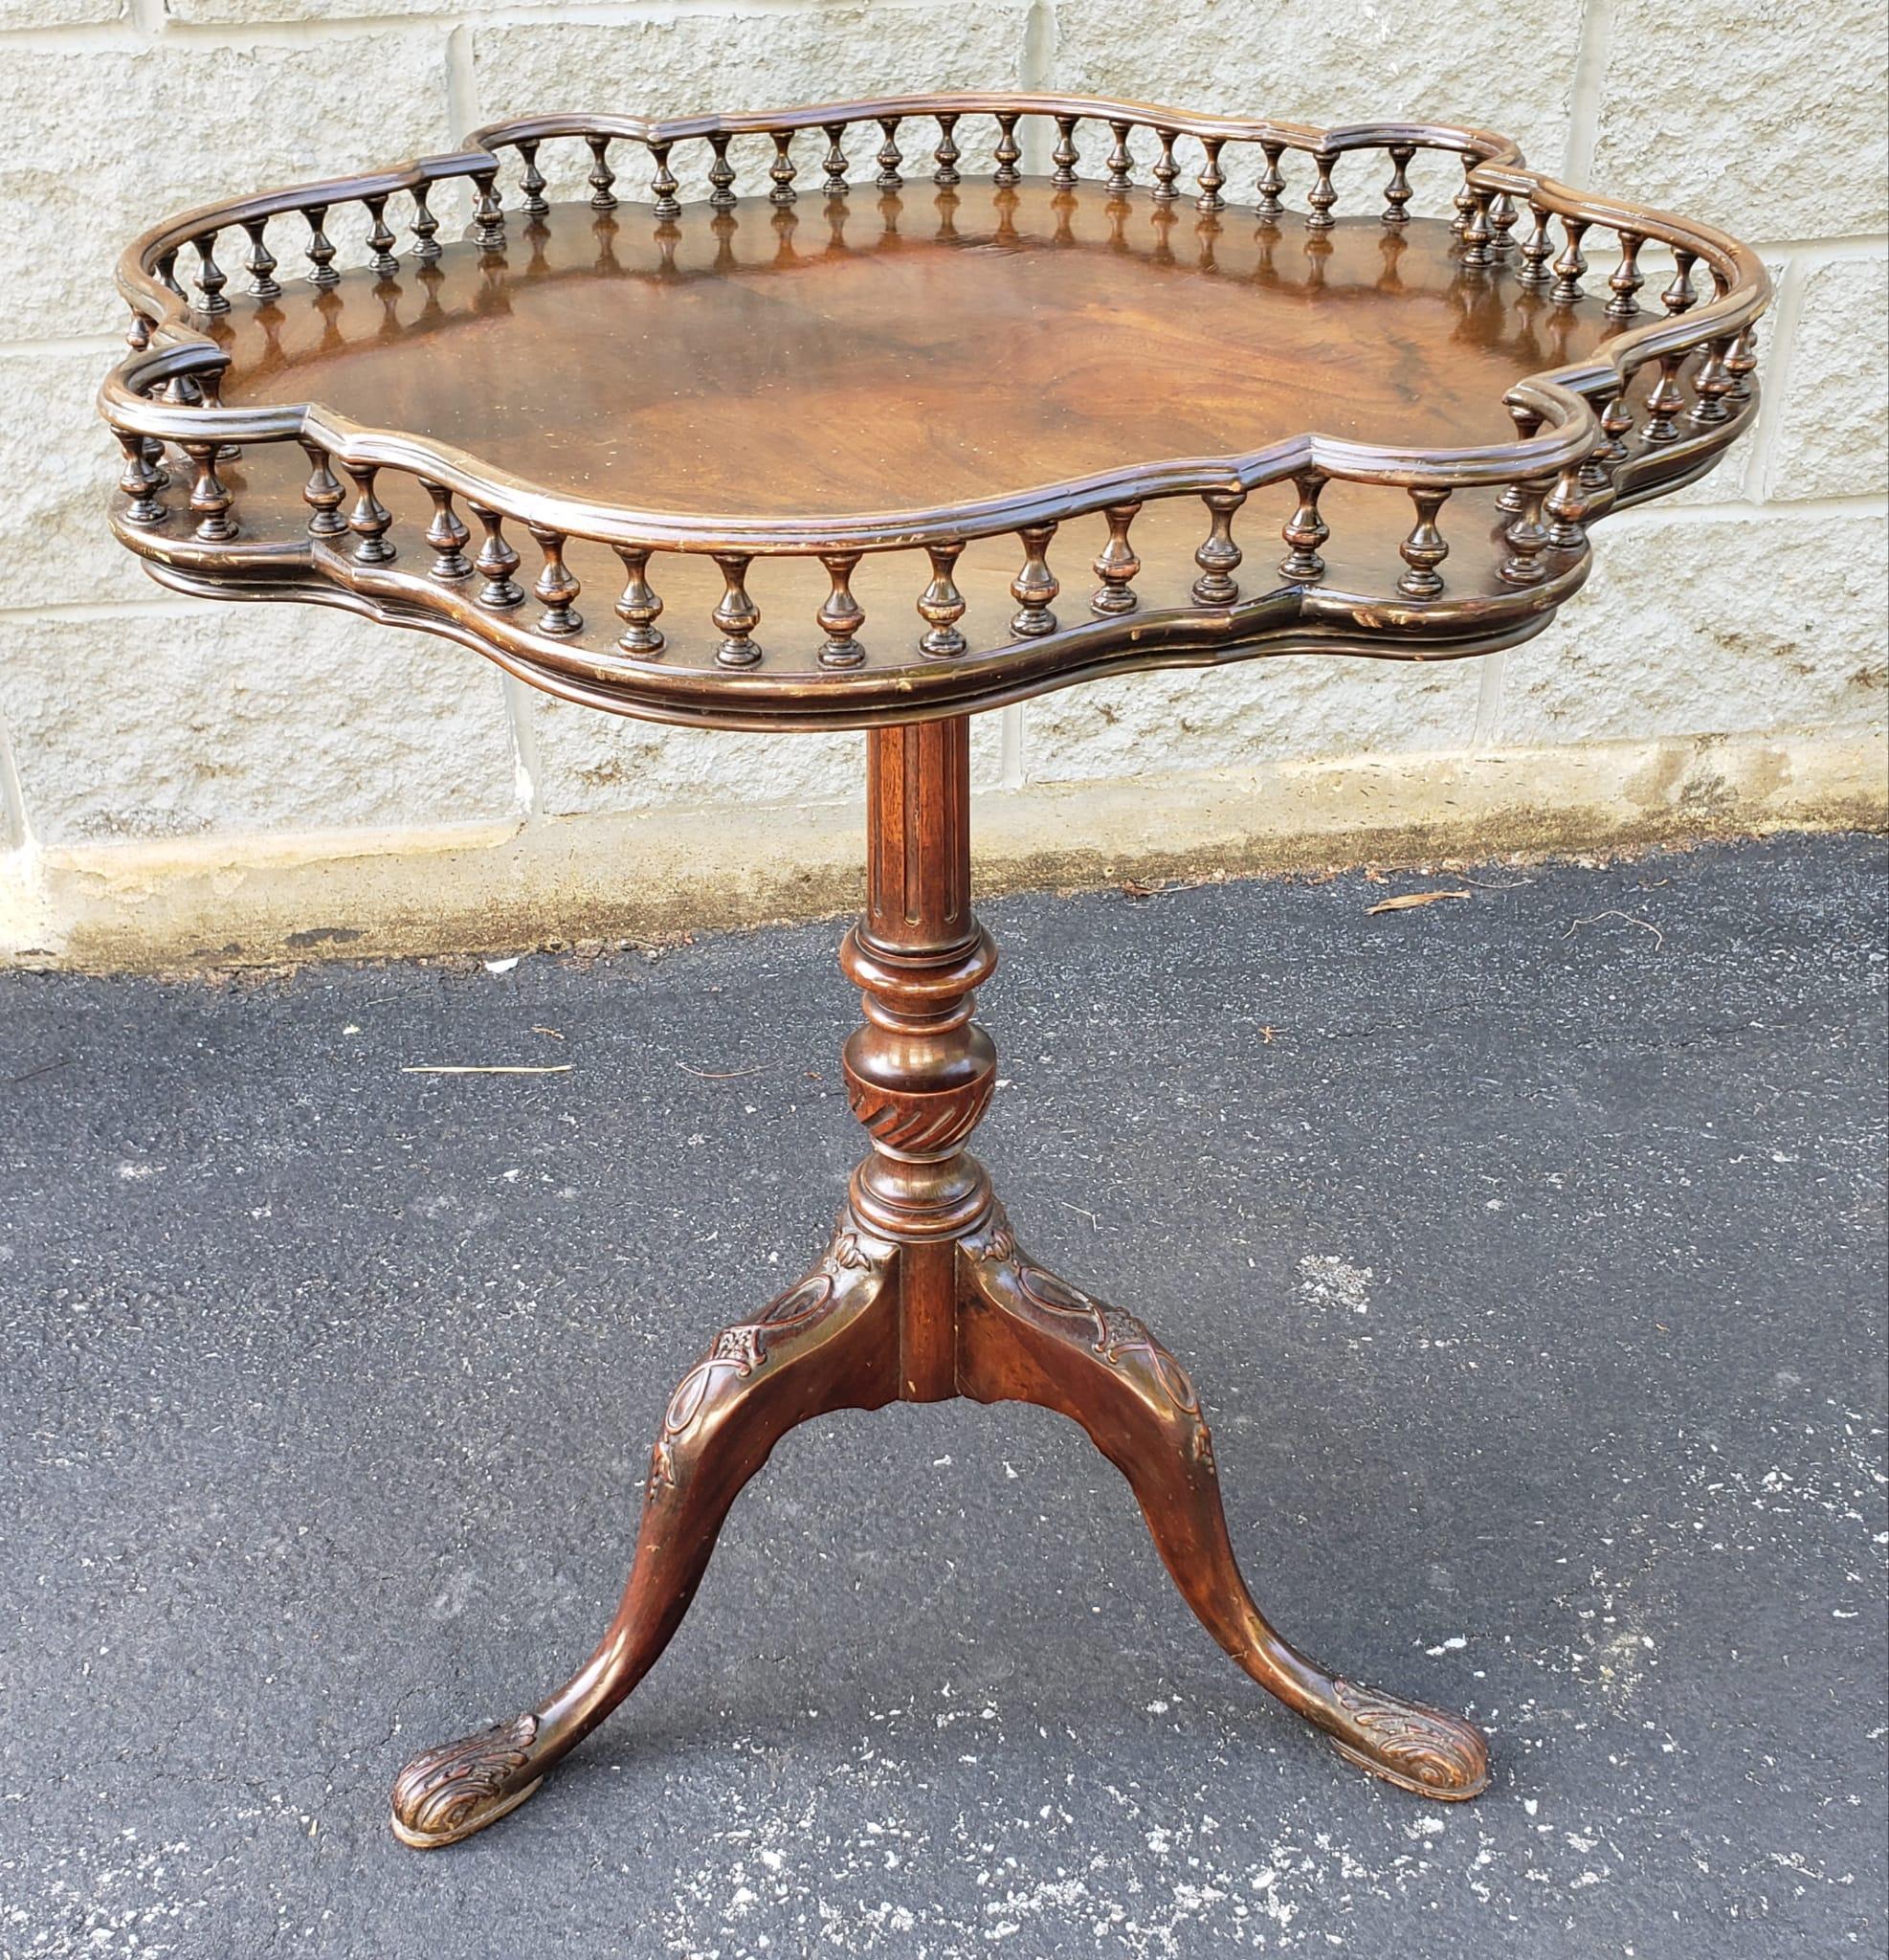 Late Victorian Walnut Galleried Tilt-Top Table, Circa 1890s In Good Condition For Sale In Germantown, MD